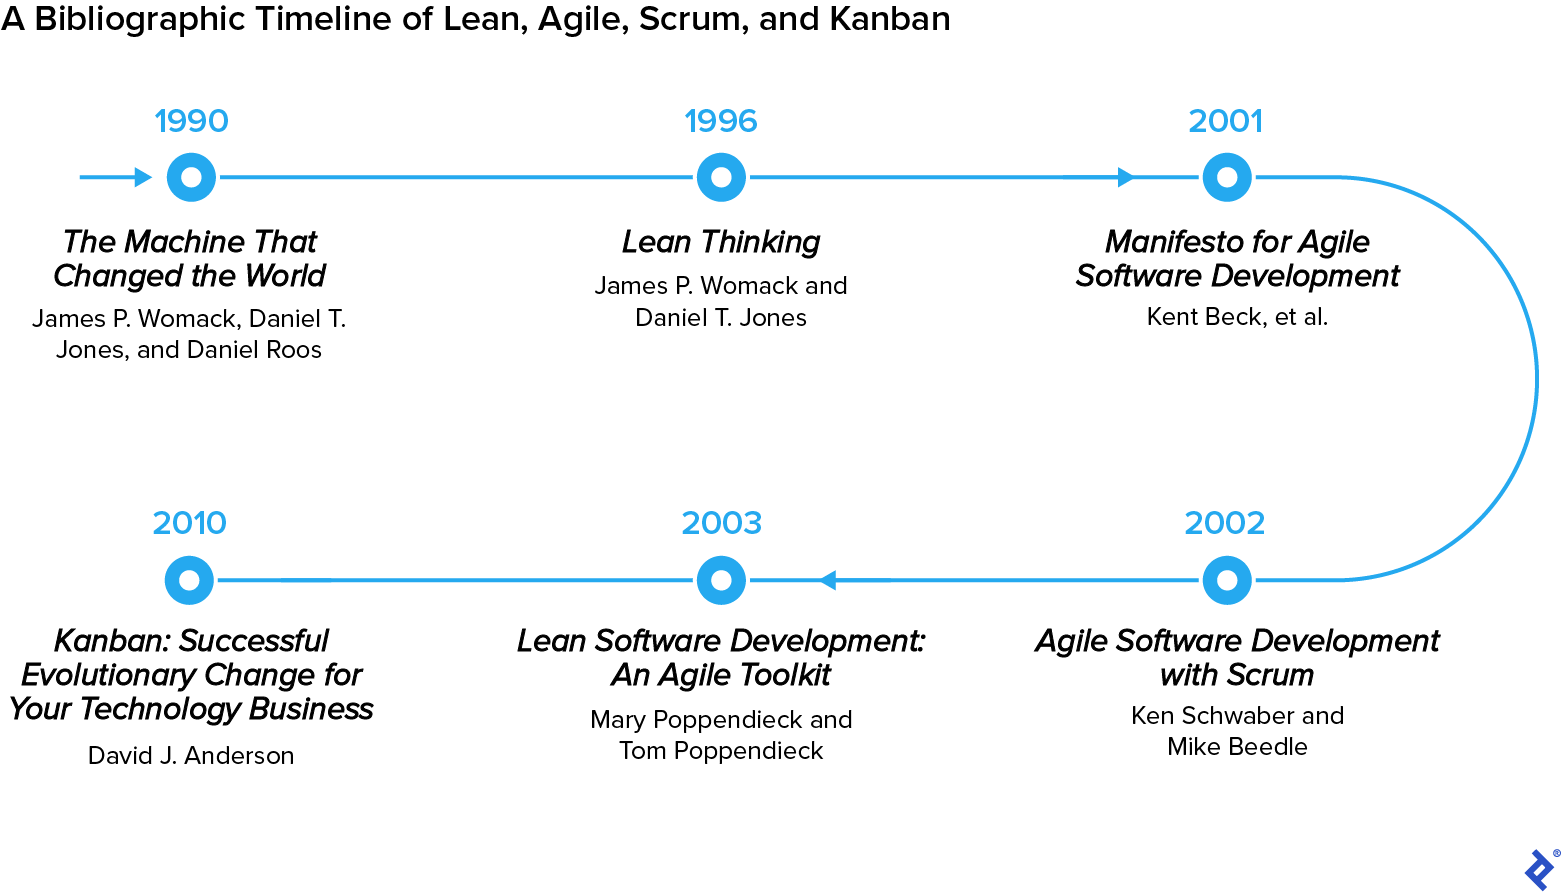 A timeline of seminal works on lean-agile development discussed in the article.